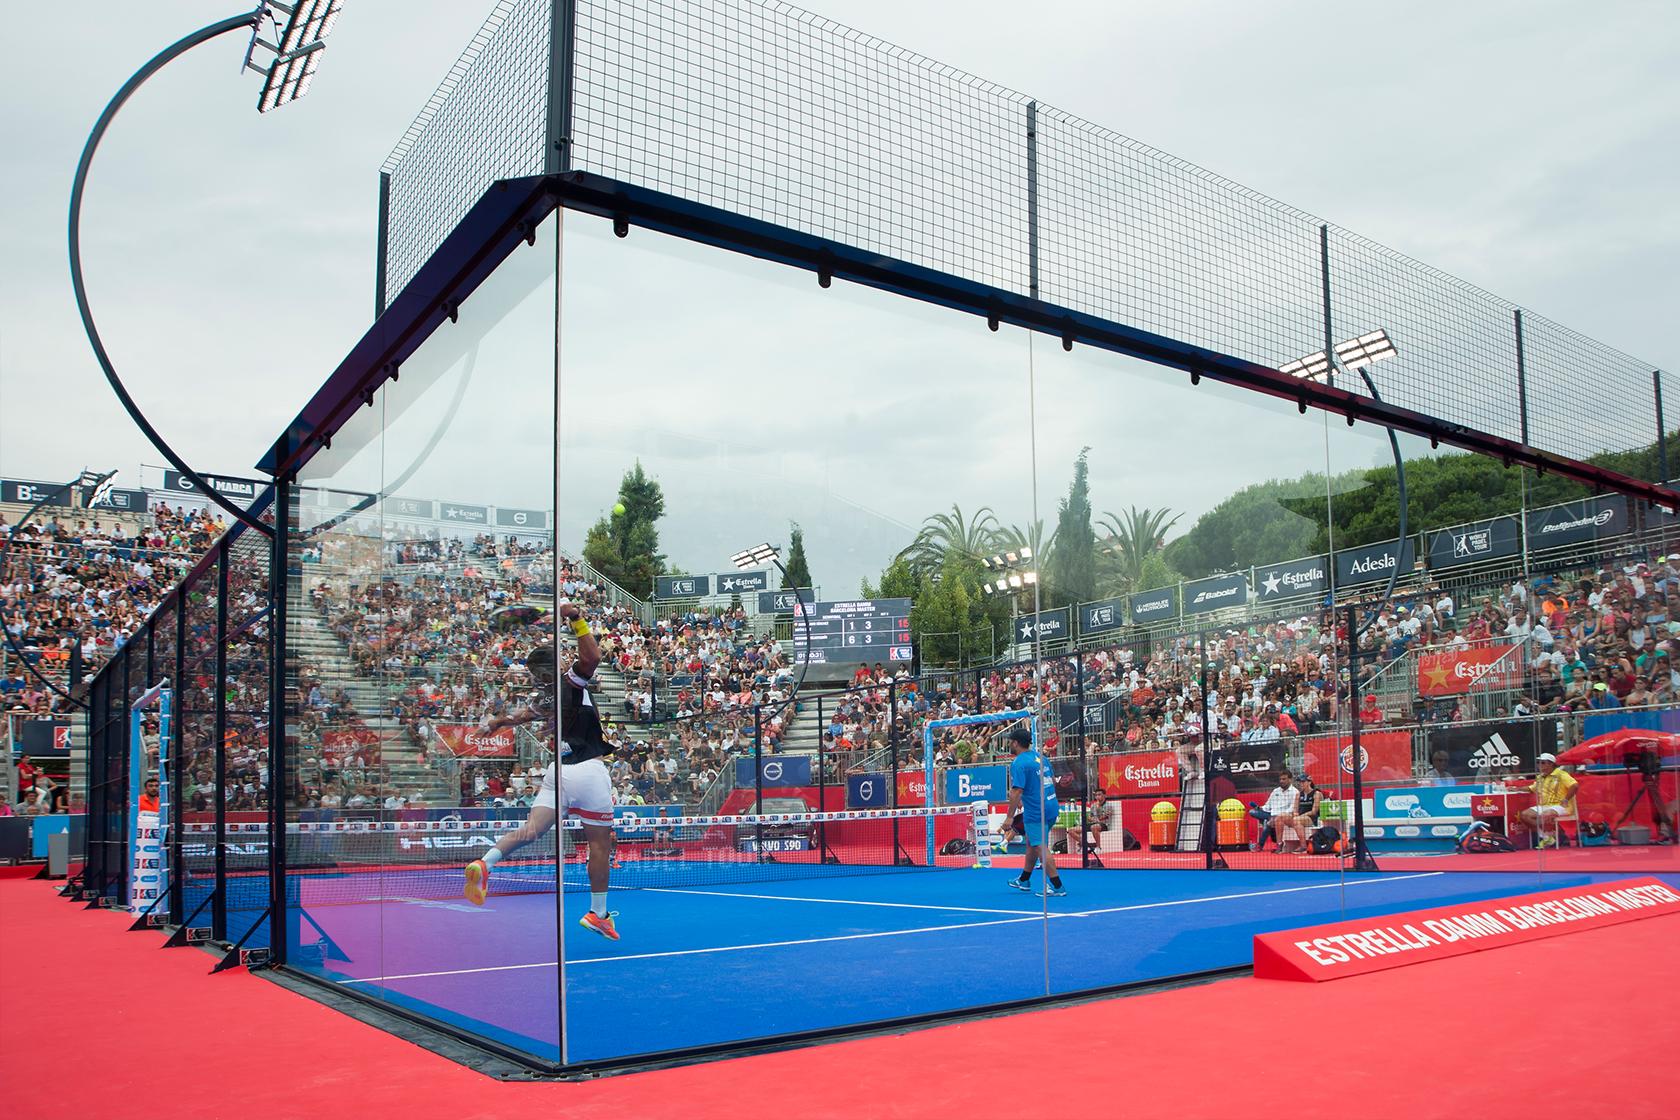 world padel tour brussels schedule